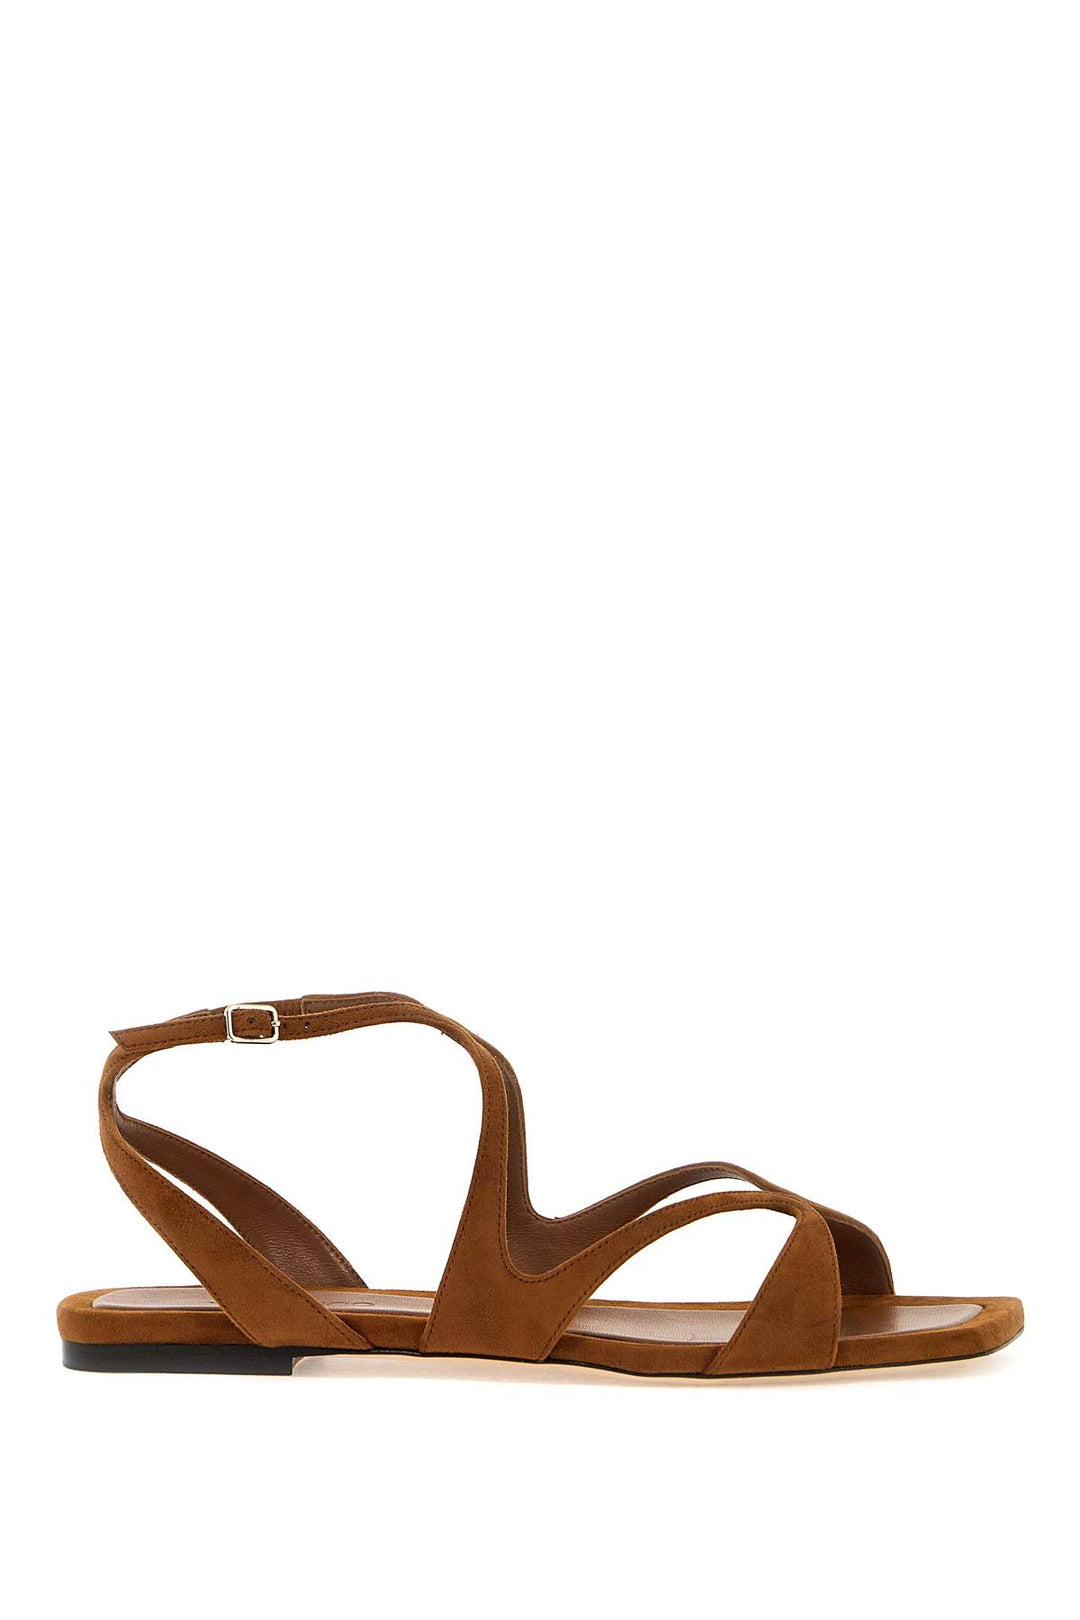 ayla flat suede leather sandals-0